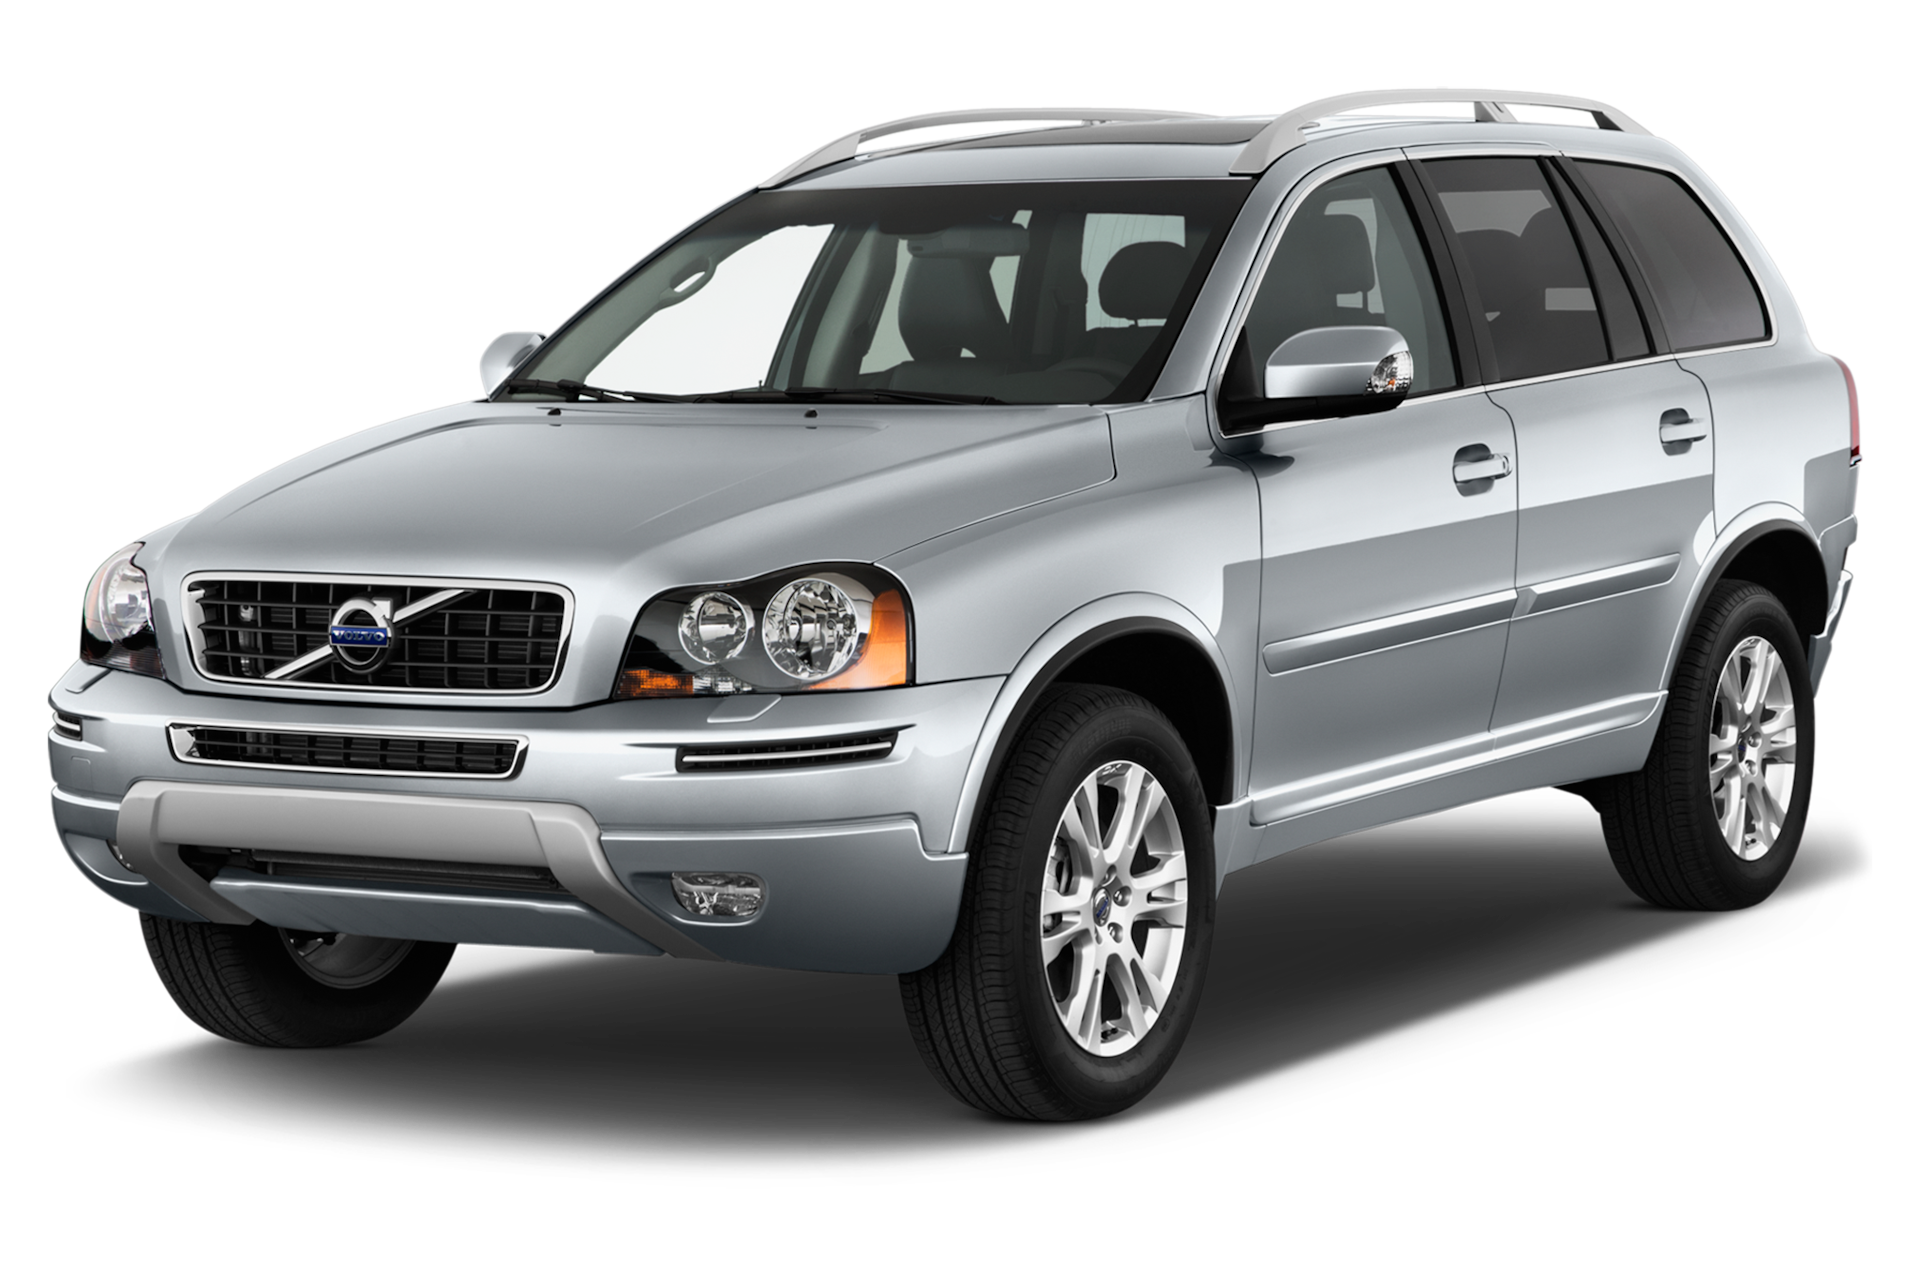 2013 Volvo XC90 Prices, Reviews, and Photos - MotorTrend